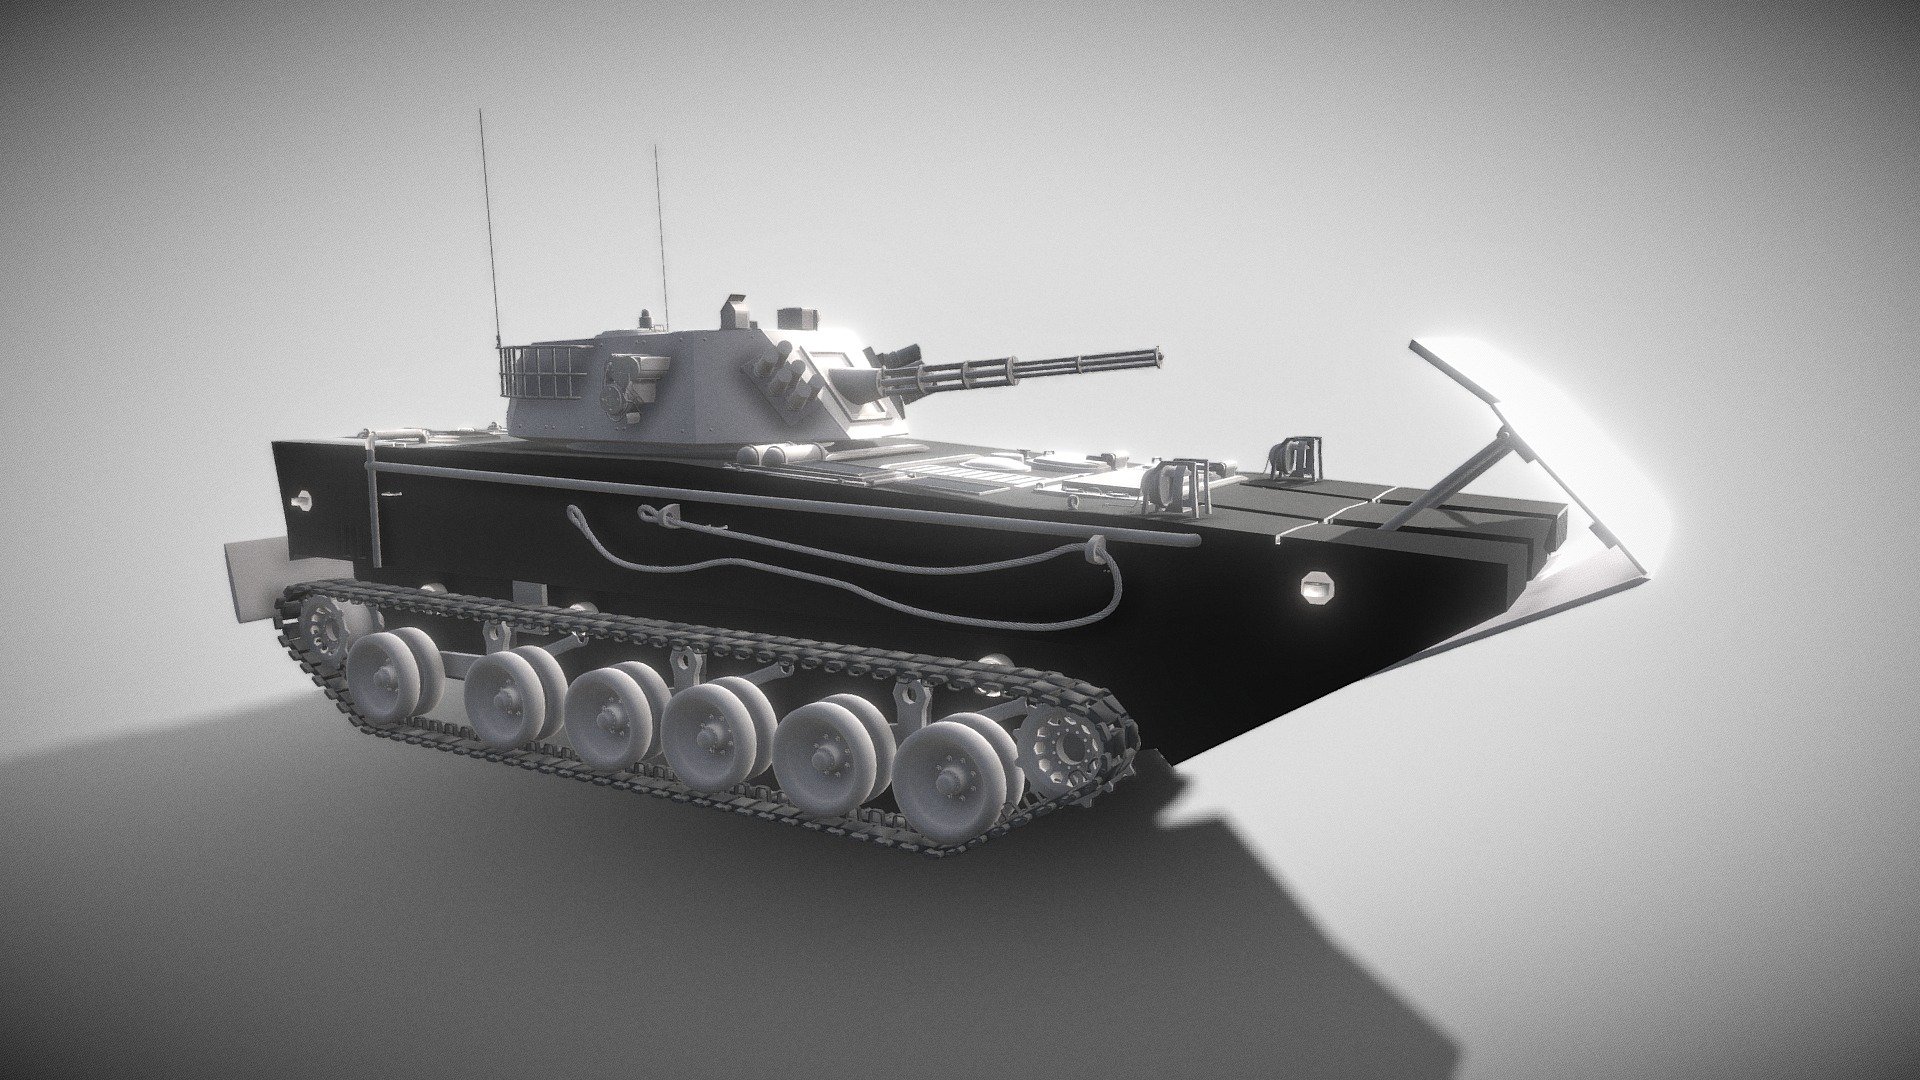 The Type 05 amphibious armored vehicle (Chinese: 05式两栖装甲车) is a family of amphibious tracked armored fighting vehicles developed by Norinco for the People's Liberation Army Navy Marine Corps, consisting of two main combat variants — the ZBD-05 infantry fighting vehicle and the ZTD-05 assault vehicle, as well as several support variants based on the ZBD-05. The Type 05s could be launched at sea from an amphibious assault ship over the horizon, and features a hydroplane, a design concept that has been compared to the cancelled United States Expeditionary Fighting Vehicle (EFV) program.

As a dedicated amphibious combat vehicle, the Type 05 is aiming to provide unique amphibious capability that emphasizes speedy landing operations. China is the only country to produce such unique high-speed amphibious fighting vehicles.
Learn More at https://killcapturedestroy.com/ - ZBD-05 Type 05  Amphibious Armored Vehicle - Download Free 3D model by KillCaptureDestroy (@jloiacono82) 3d model